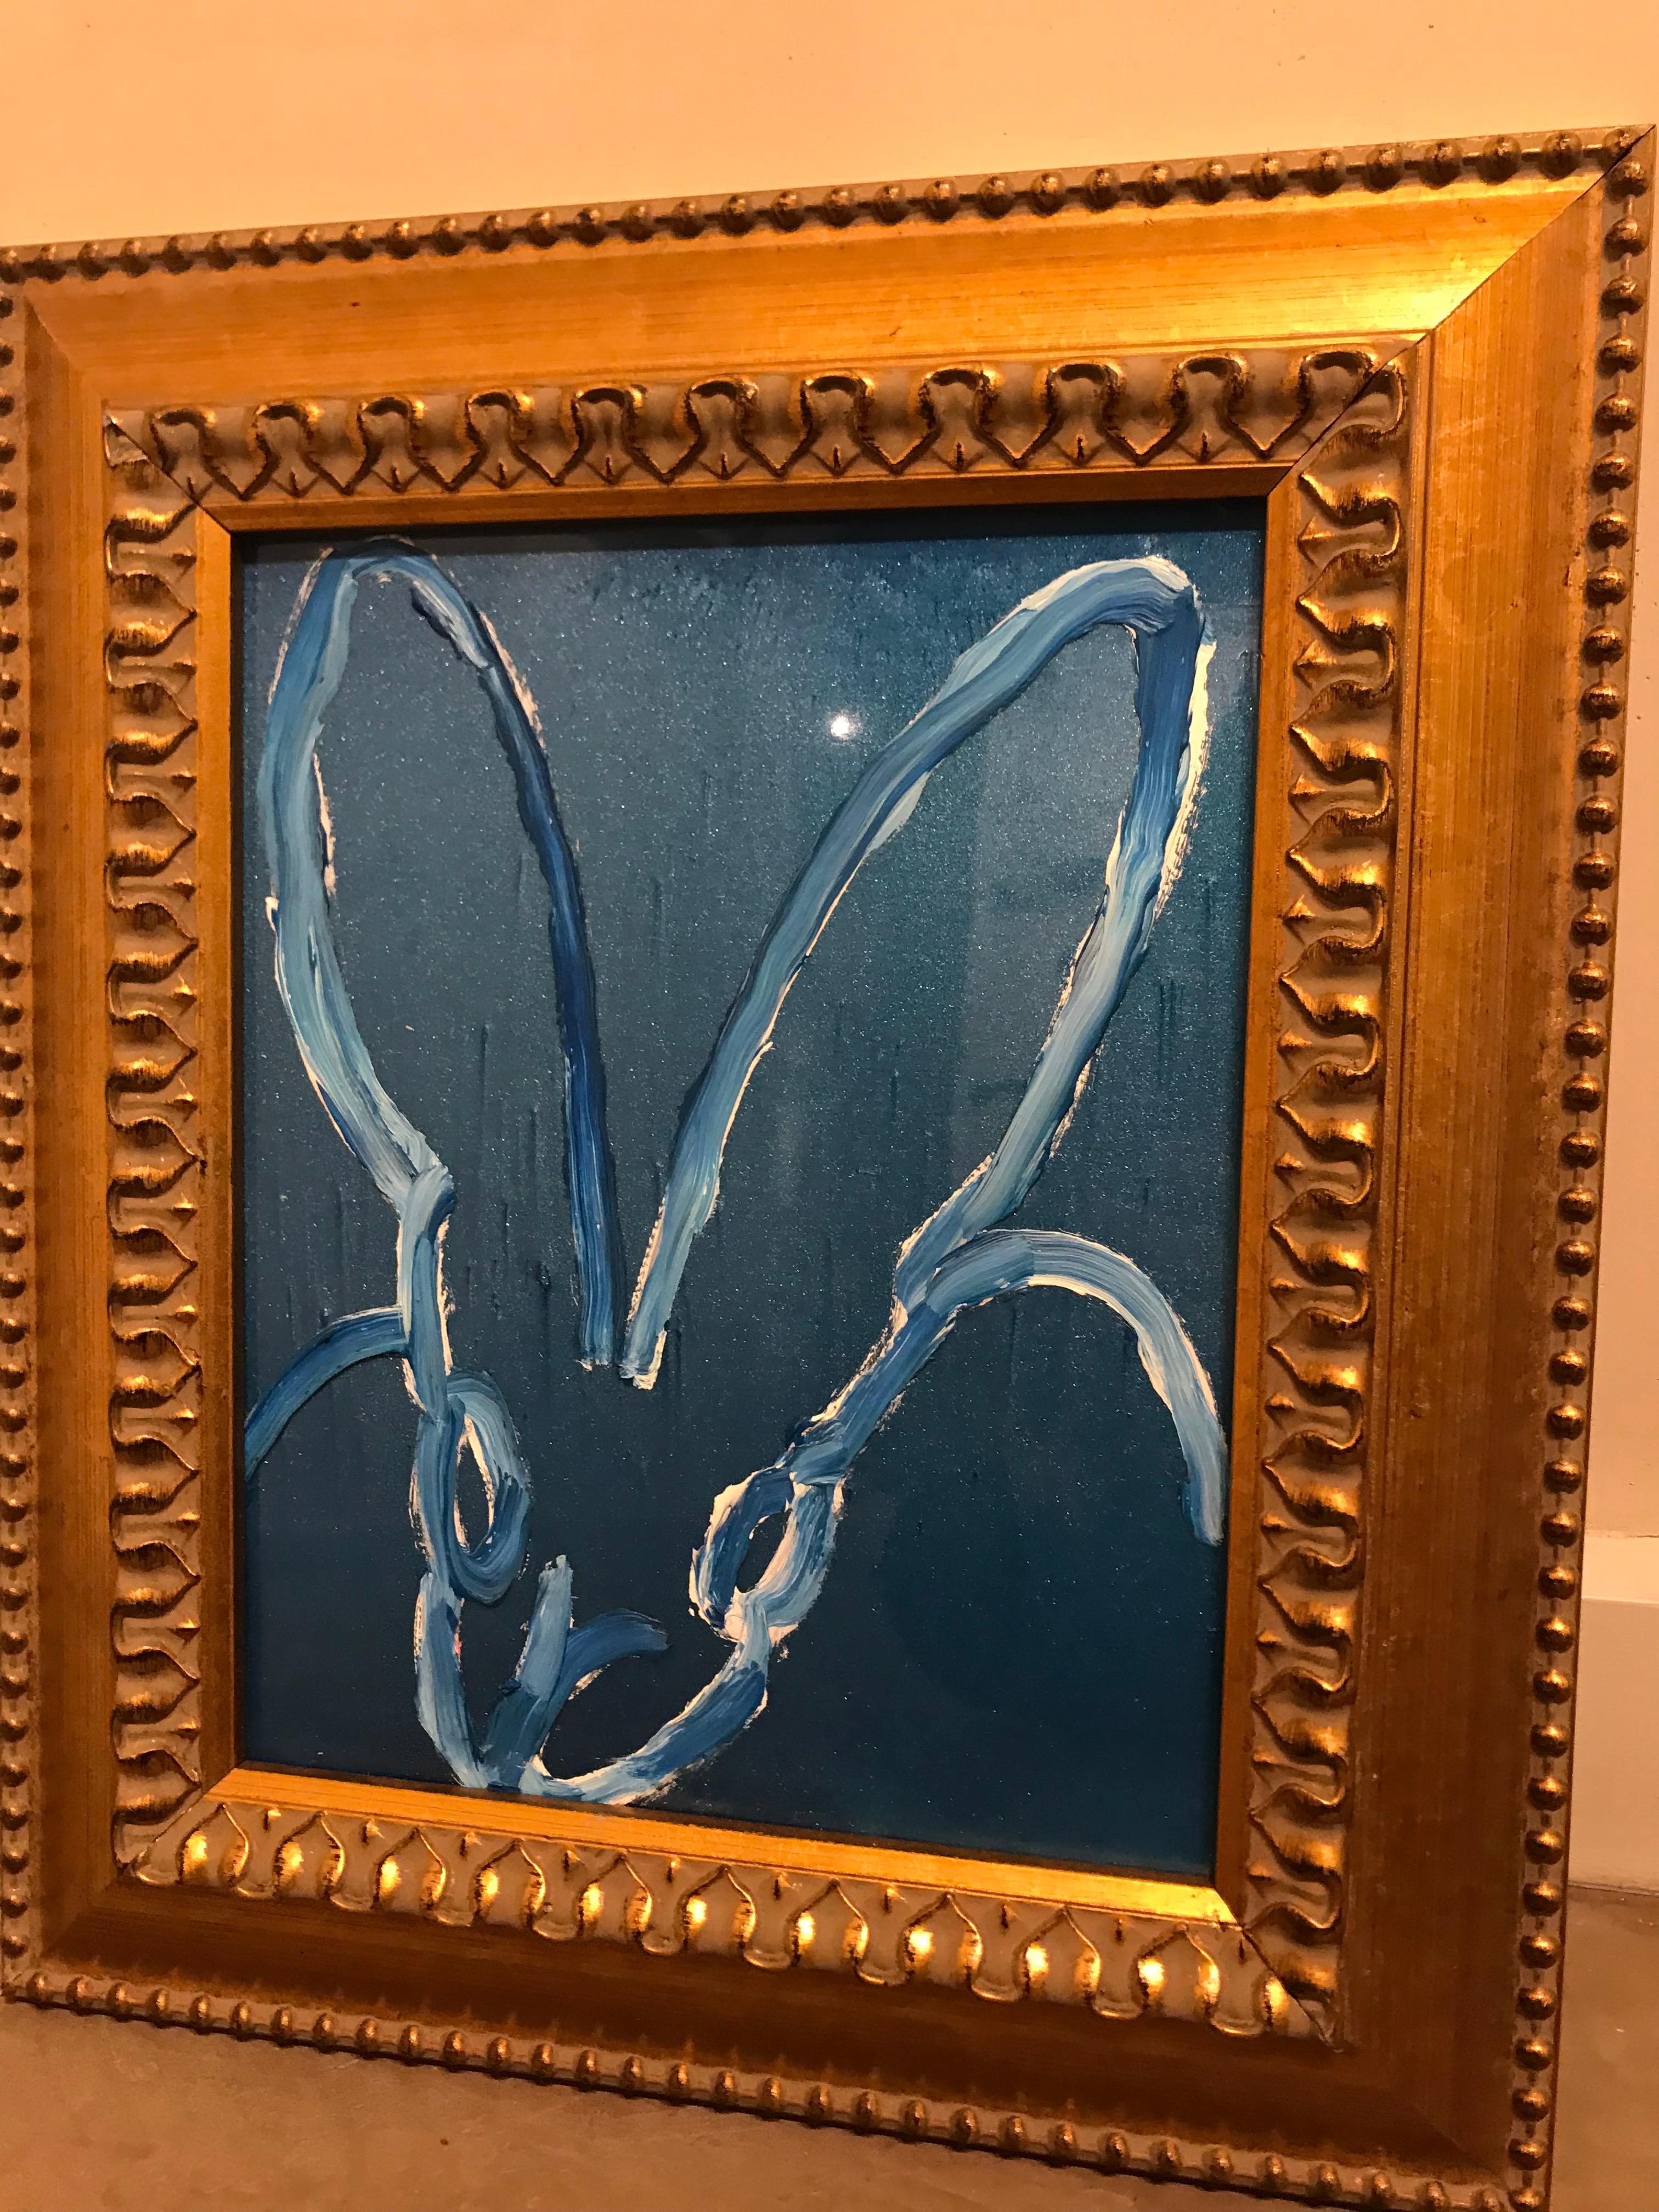 Untitled  Bunny -framed blue high gloss pearl oil painting with resin - Neo-Expressionist Painting by Hunt Slonem